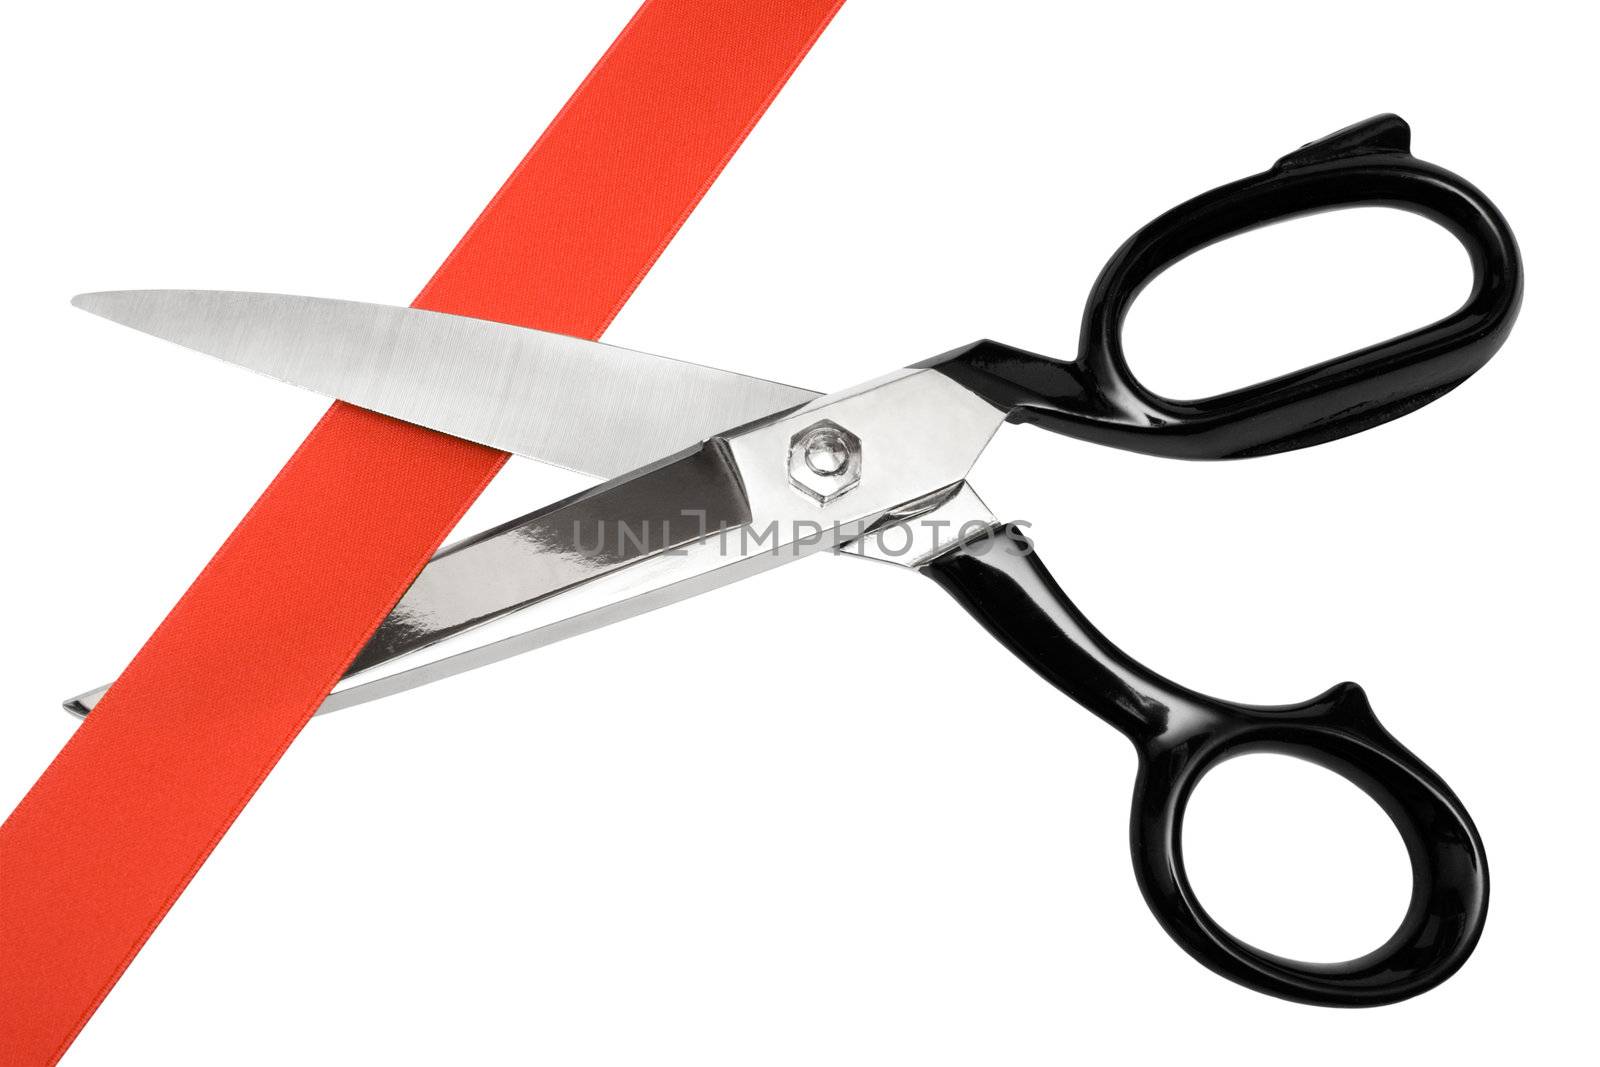 Pair of scissors cutting red ribbon. Isolated on a white background.